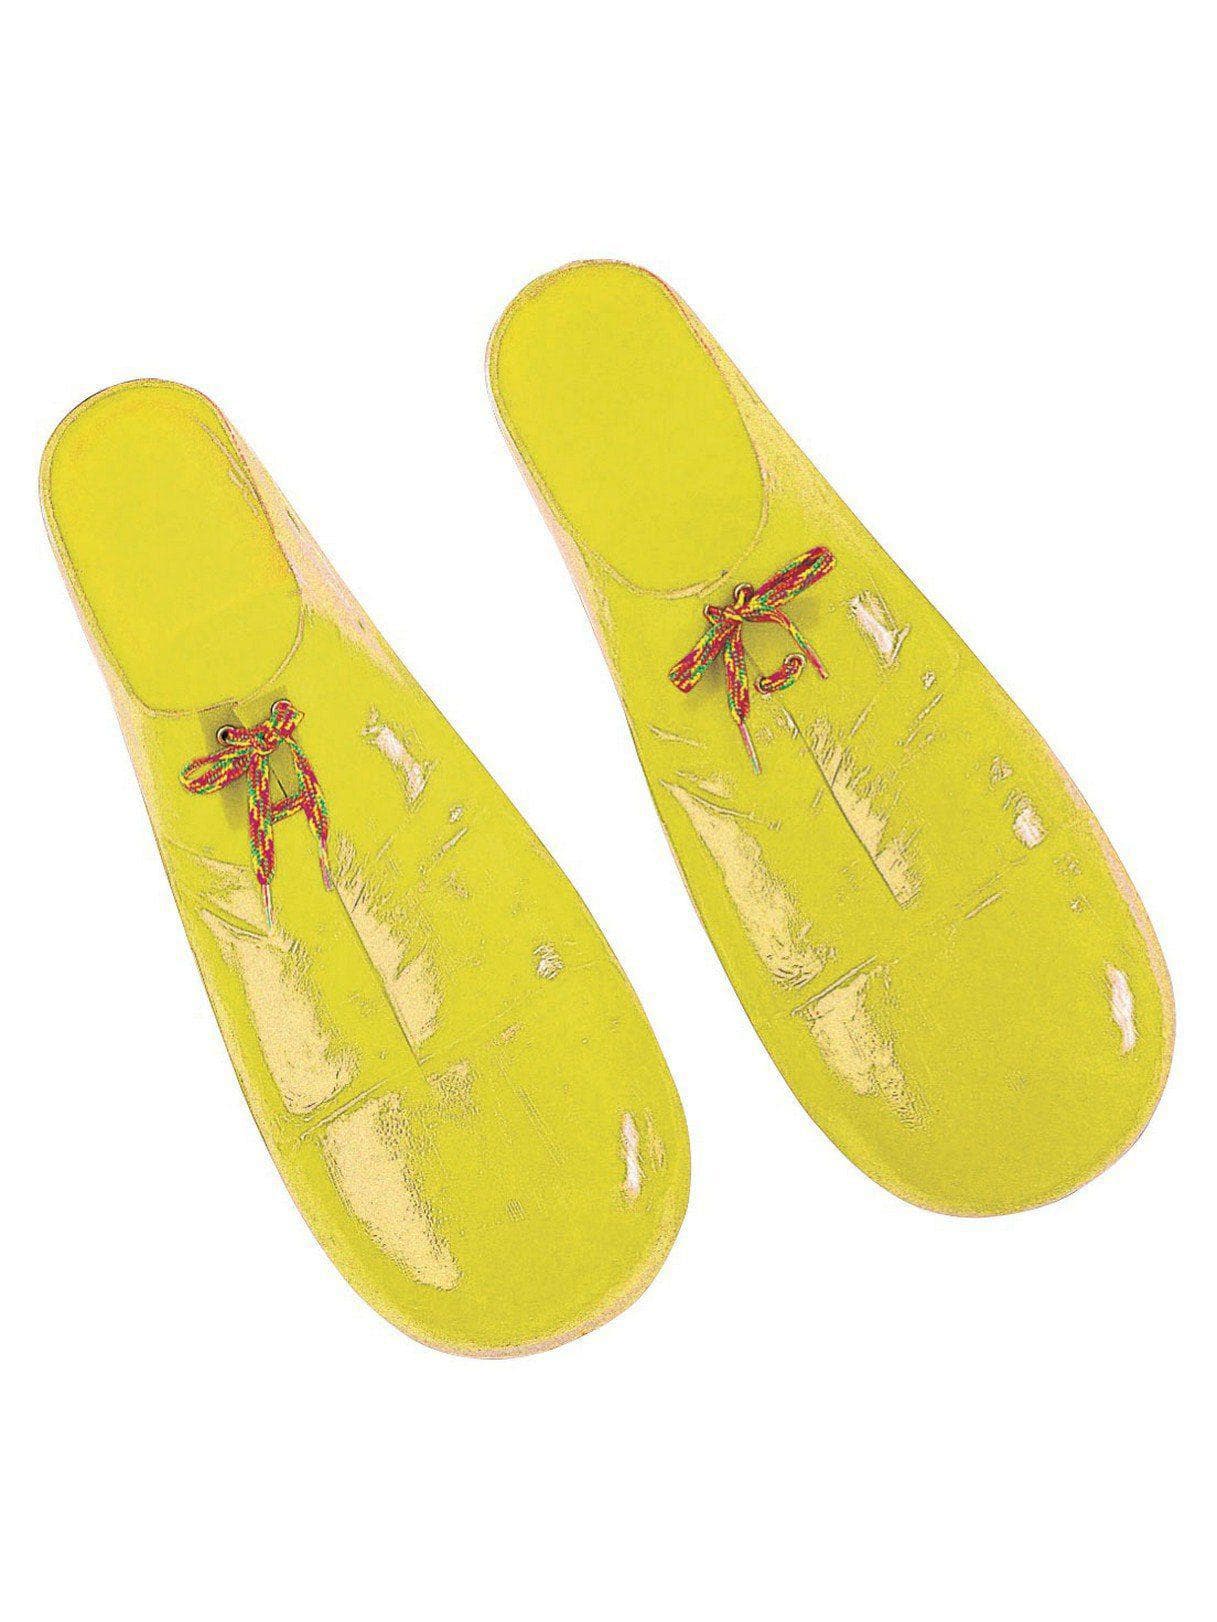 Yellow Clown Shoes - costumes.com